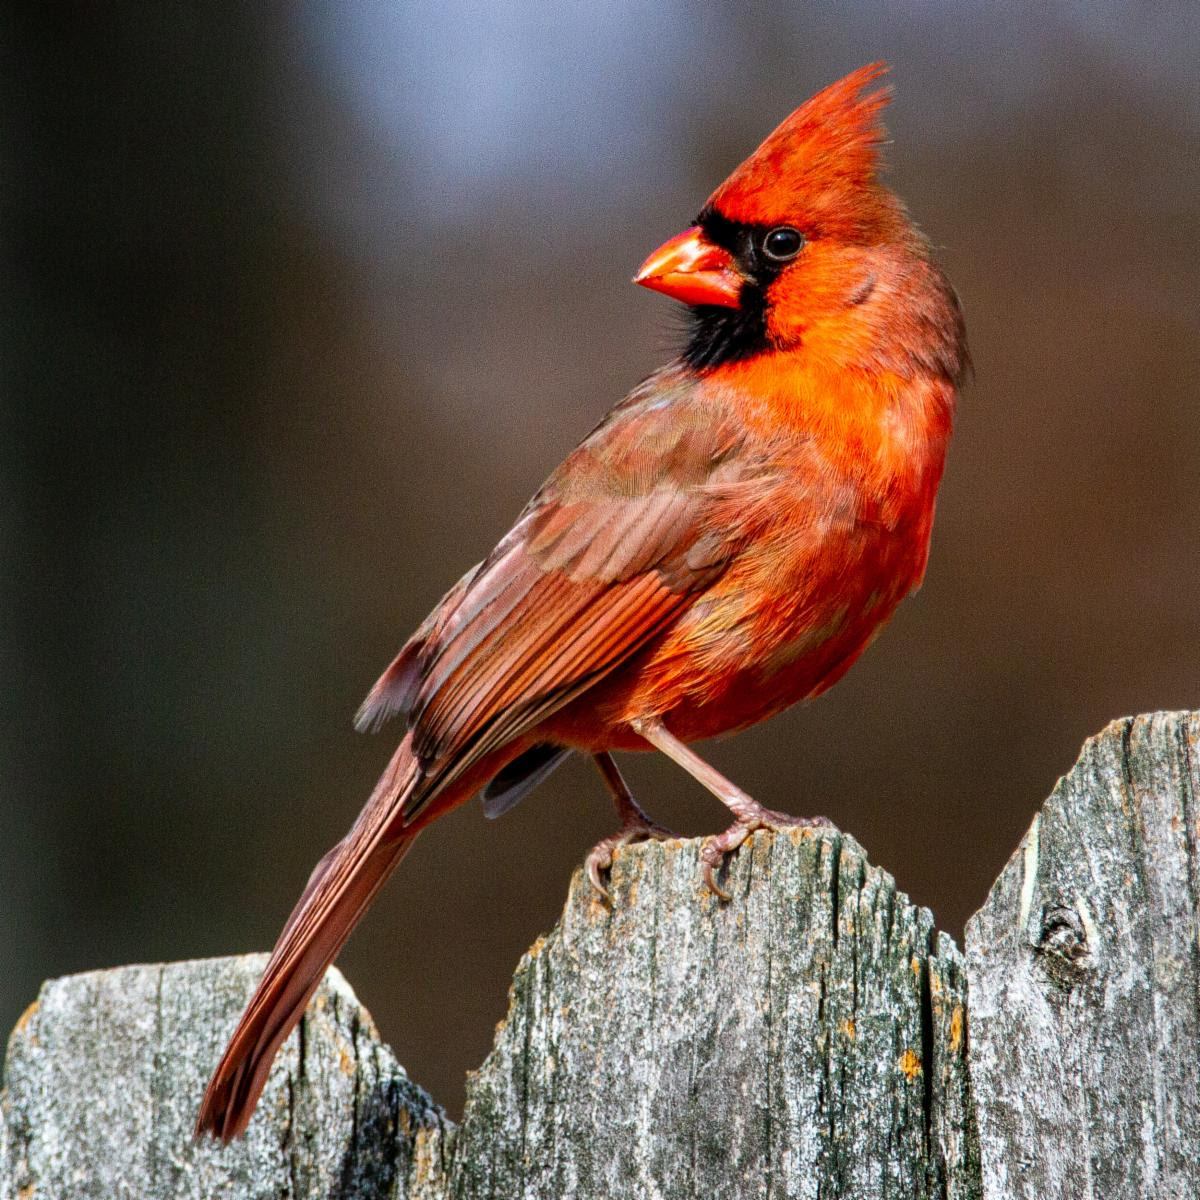 A male northern cardinal perched on a fence.